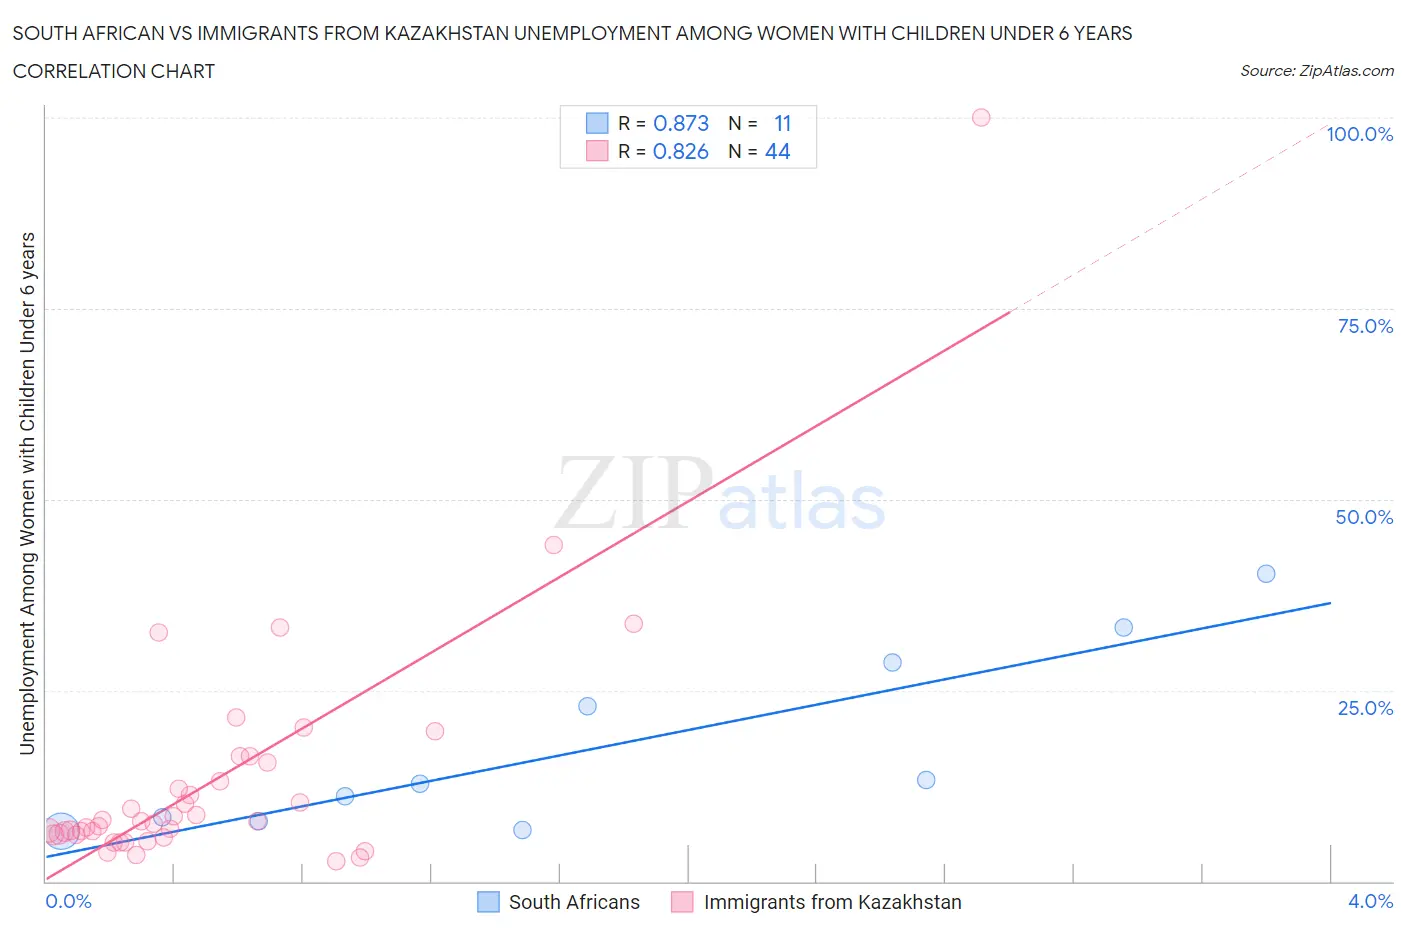 South African vs Immigrants from Kazakhstan Unemployment Among Women with Children Under 6 years